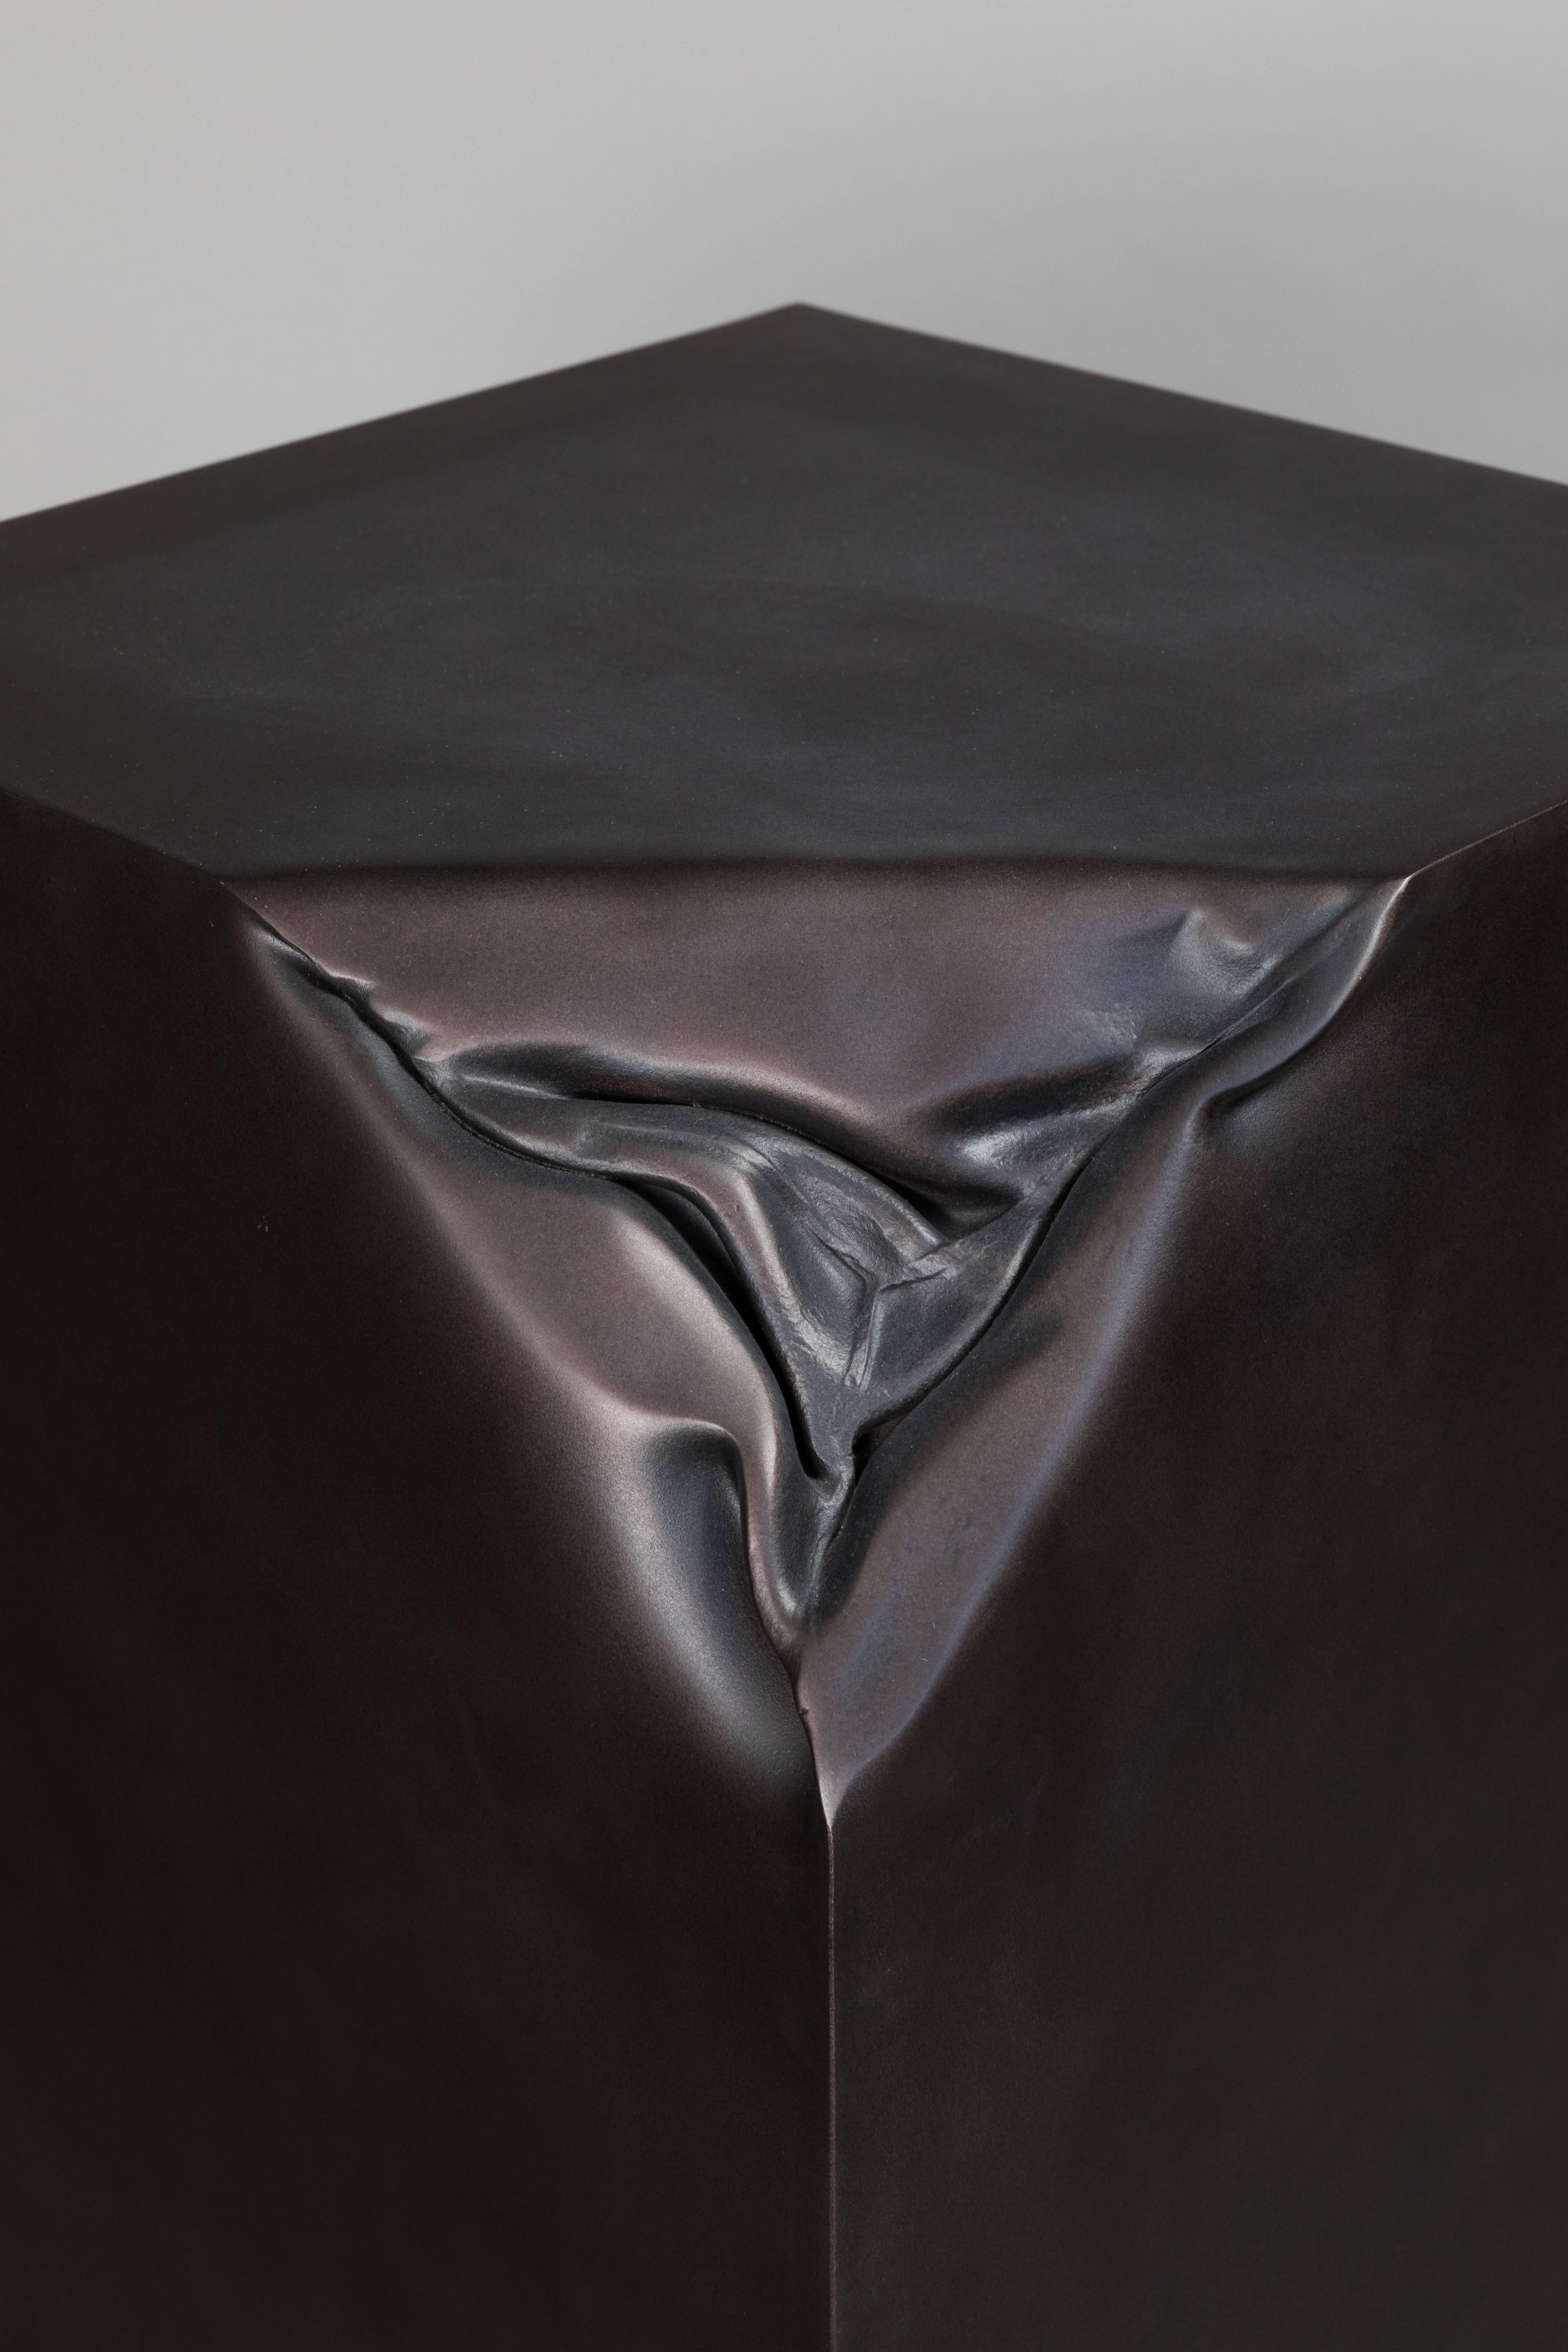 Precision crafted rectangle with crushed corner. Makes ideal conversation piece. Can act as a stand alone sculpture or lectern or pedestal. Welded fabrication and artfully “deconstructed.” A signature design. One of a kind.
Blackened patina spray